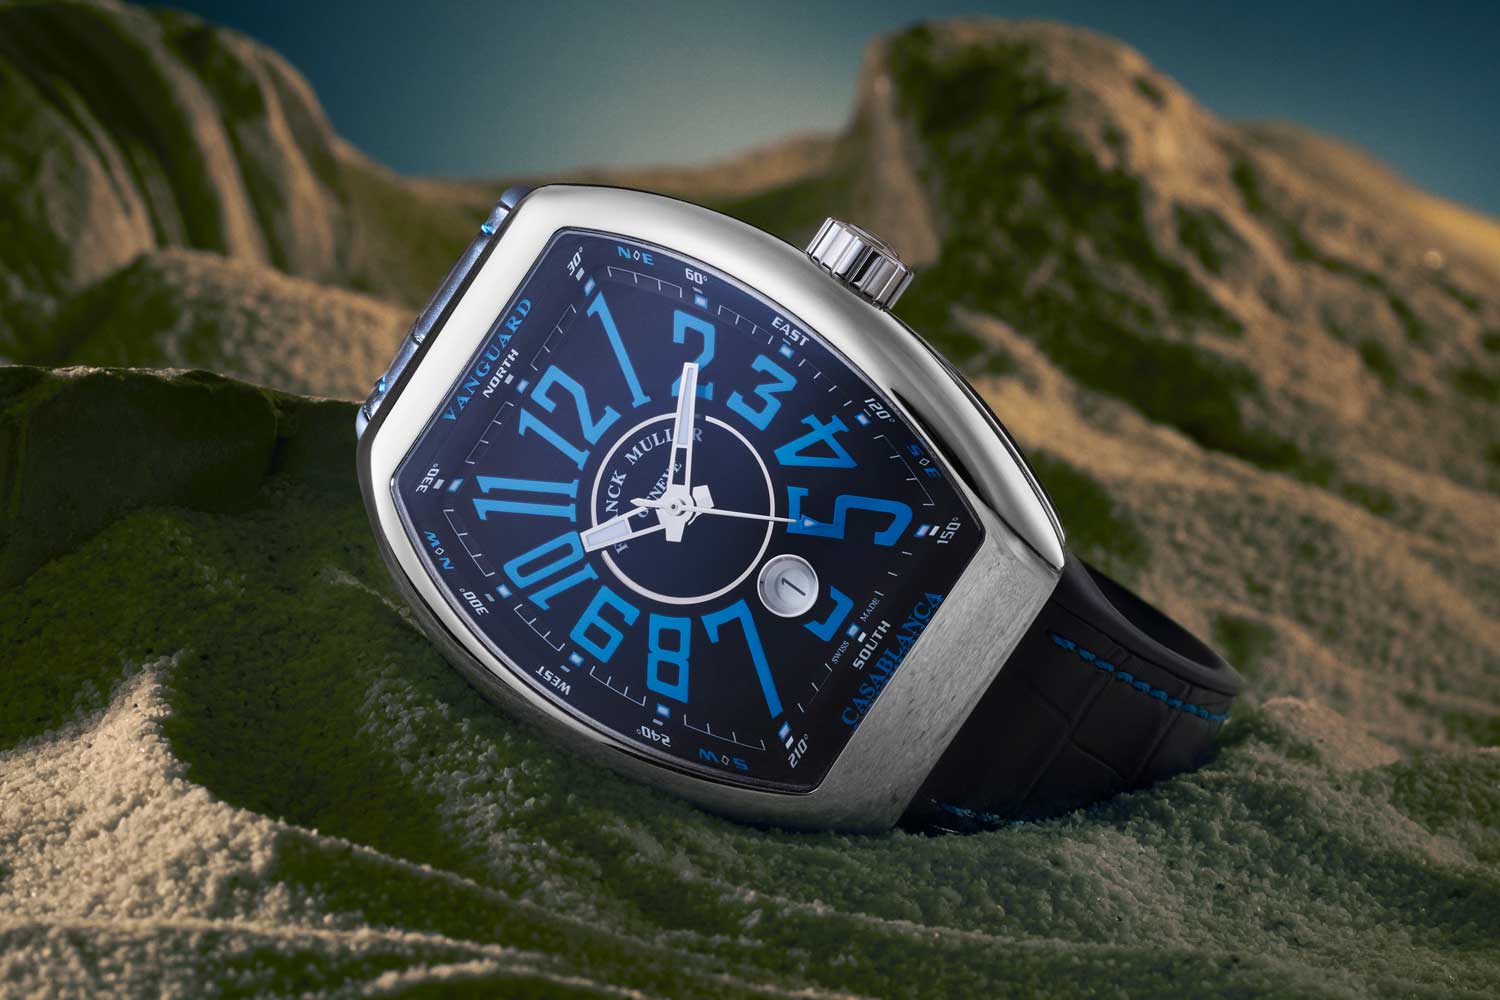 Franck Muller Vanguard Casablanca sporting a black dial with blue accents